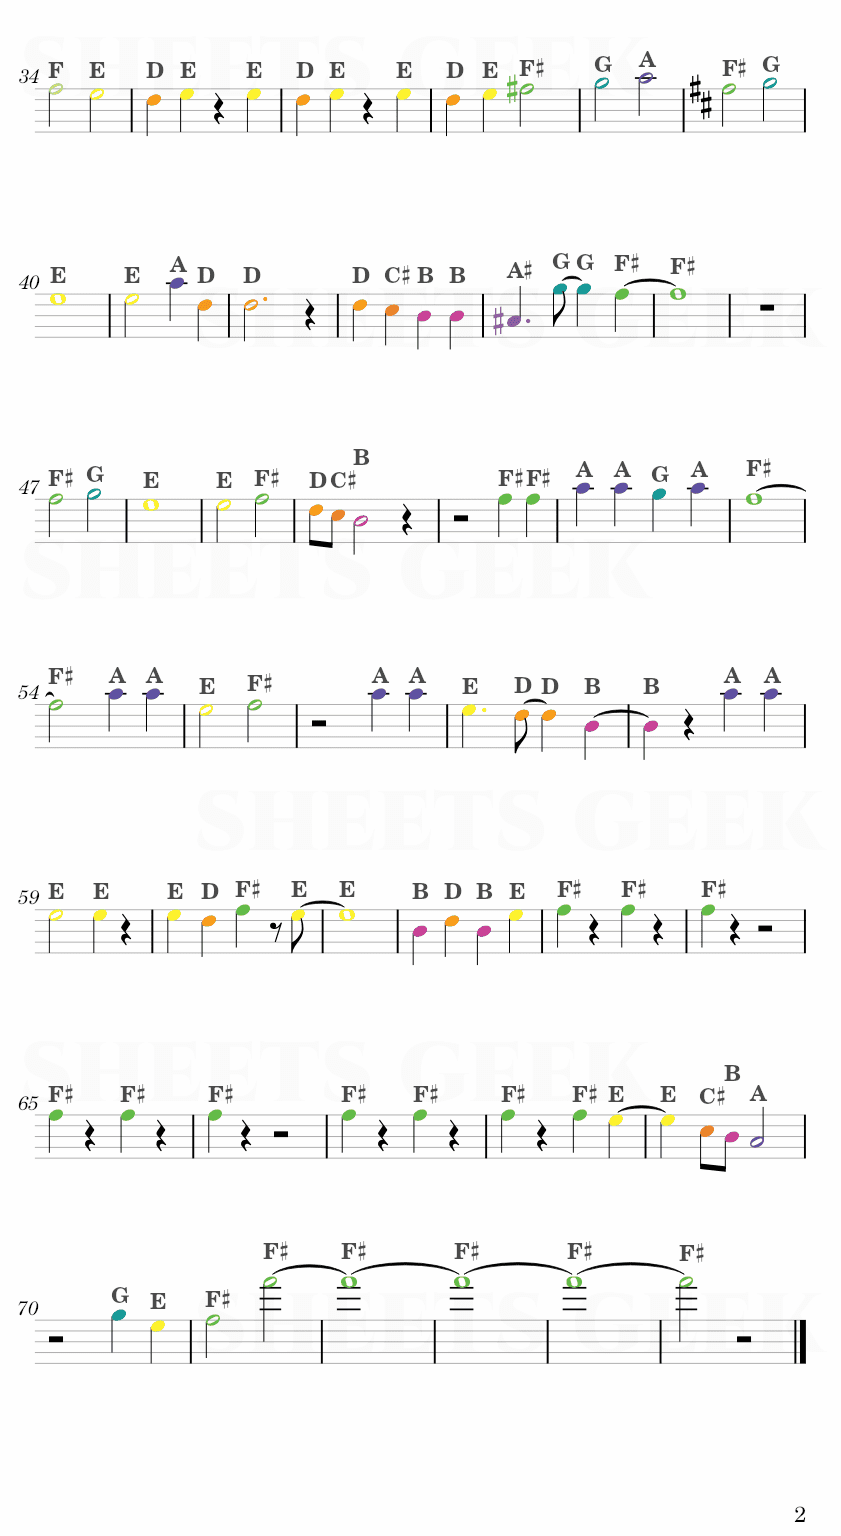 UNDER THE TREE - Sim (Attack on Titan: The Final Season ENDING 3) Easy Sheet Music Free for piano, keyboard, flute, violin, sax, cello page 2